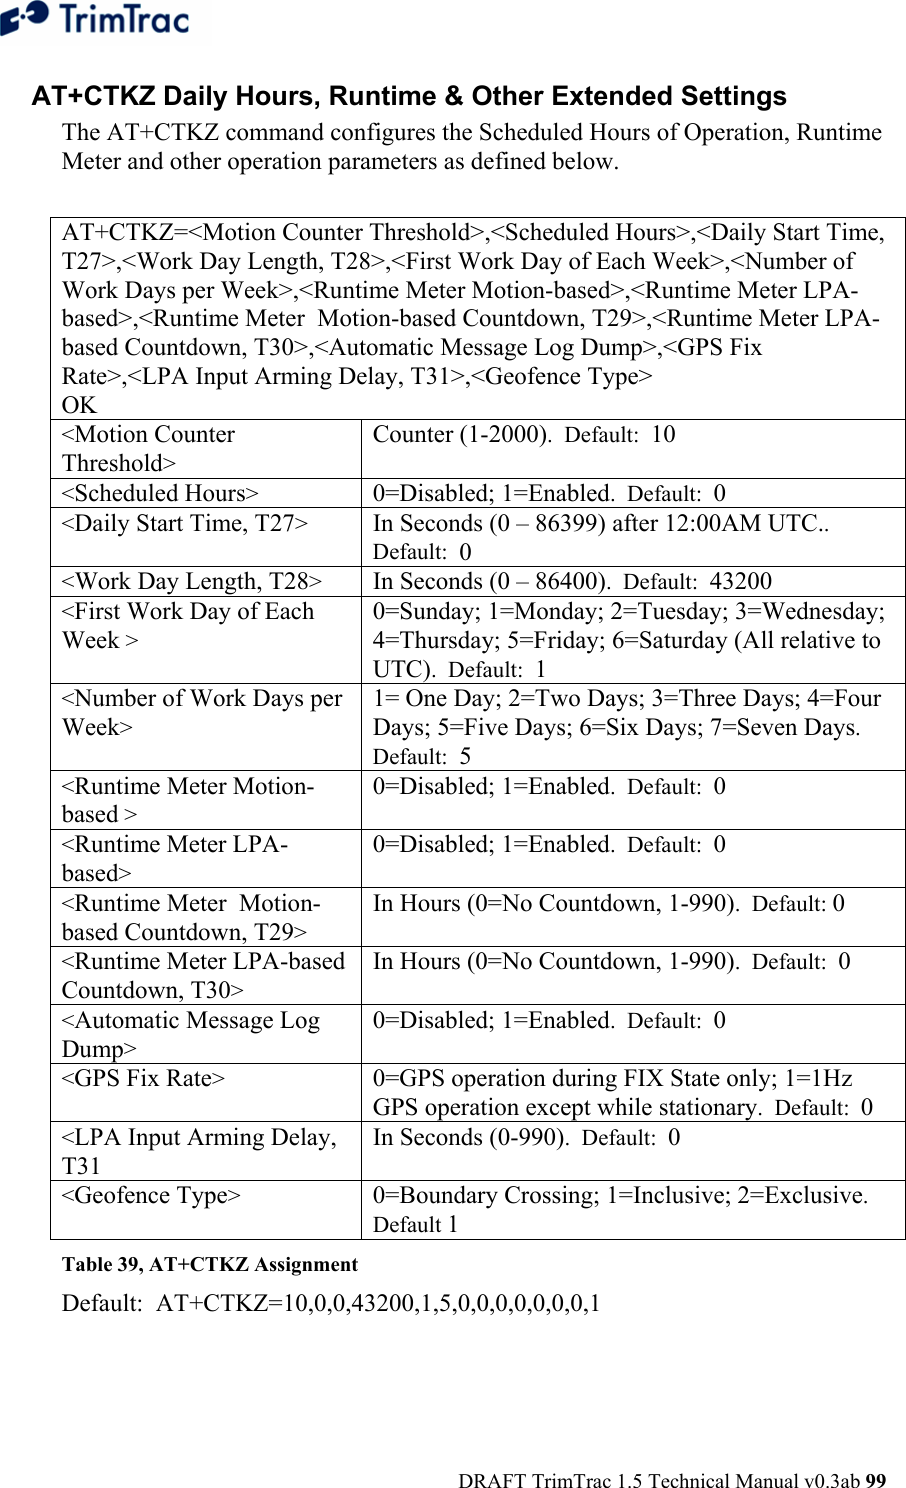  DRAFT TrimTrac 1.5 Technical Manual v0.3ab 99 AT+CTKZ Daily Hours, Runtime &amp; Other Extended Settings  The AT+CTKZ command configures the Scheduled Hours of Operation, Runtime Meter and other operation parameters as defined below.   AT+CTKZ=&lt;Motion Counter Threshold&gt;,&lt;Scheduled Hours&gt;,&lt;Daily Start Time, T27&gt;,&lt;Work Day Length, T28&gt;,&lt;First Work Day of Each Week&gt;,&lt;Number of Work Days per Week&gt;,&lt;Runtime Meter Motion-based&gt;,&lt;Runtime Meter LPA-based&gt;,&lt;Runtime Meter  Motion-based Countdown, T29&gt;,&lt;Runtime Meter LPA-based Countdown, T30&gt;,&lt;Automatic Message Log Dump&gt;,&lt;GPS Fix Rate&gt;,&lt;LPA Input Arming Delay, T31&gt;,&lt;Geofence Type&gt; OK &lt;Motion Counter Threshold&gt; Counter (1-2000).  Default:  10 &lt;Scheduled Hours&gt;  0=Disabled; 1=Enabled.  Default:  0 &lt;Daily Start Time, T27&gt;  In Seconds (0 – 86399) after 12:00AM UTC..  Default:  0 &lt;Work Day Length, T28&gt;  In Seconds (0 – 86400).  Default:  43200 &lt;First Work Day of Each Week &gt; 0=Sunday; 1=Monday; 2=Tuesday; 3=Wednesday; 4=Thursday; 5=Friday; 6=Saturday (All relative to UTC).  Default:  1 &lt;Number of Work Days per Week&gt; 1= One Day; 2=Two Days; 3=Three Days; 4=Four Days; 5=Five Days; 6=Six Days; 7=Seven Days.  Default:  5 &lt;Runtime Meter Motion-based &gt; 0=Disabled; 1=Enabled.  Default:  0 &lt;Runtime Meter LPA-based&gt; 0=Disabled; 1=Enabled.  Default:  0 &lt;Runtime Meter  Motion-based Countdown, T29&gt; In Hours (0=No Countdown, 1-990).  Default: 0 &lt;Runtime Meter LPA-based Countdown, T30&gt; In Hours (0=No Countdown, 1-990).  Default:  0 &lt;Automatic Message Log Dump&gt; 0=Disabled; 1=Enabled.  Default:  0 &lt;GPS Fix Rate&gt;  0=GPS operation during FIX State only; 1=1Hz GPS operation except while stationary.  Default:  0 &lt;LPA Input Arming Delay, T31 In Seconds (0-990).  Default:  0 &lt;Geofence Type&gt;  0=Boundary Crossing; 1=Inclusive; 2=Exclusive. Default 1 Table 39, AT+CTKZ Assignment Default:  AT+CTKZ=10,0,0,43200,1,5,0,0,0,0,0,0,0,1